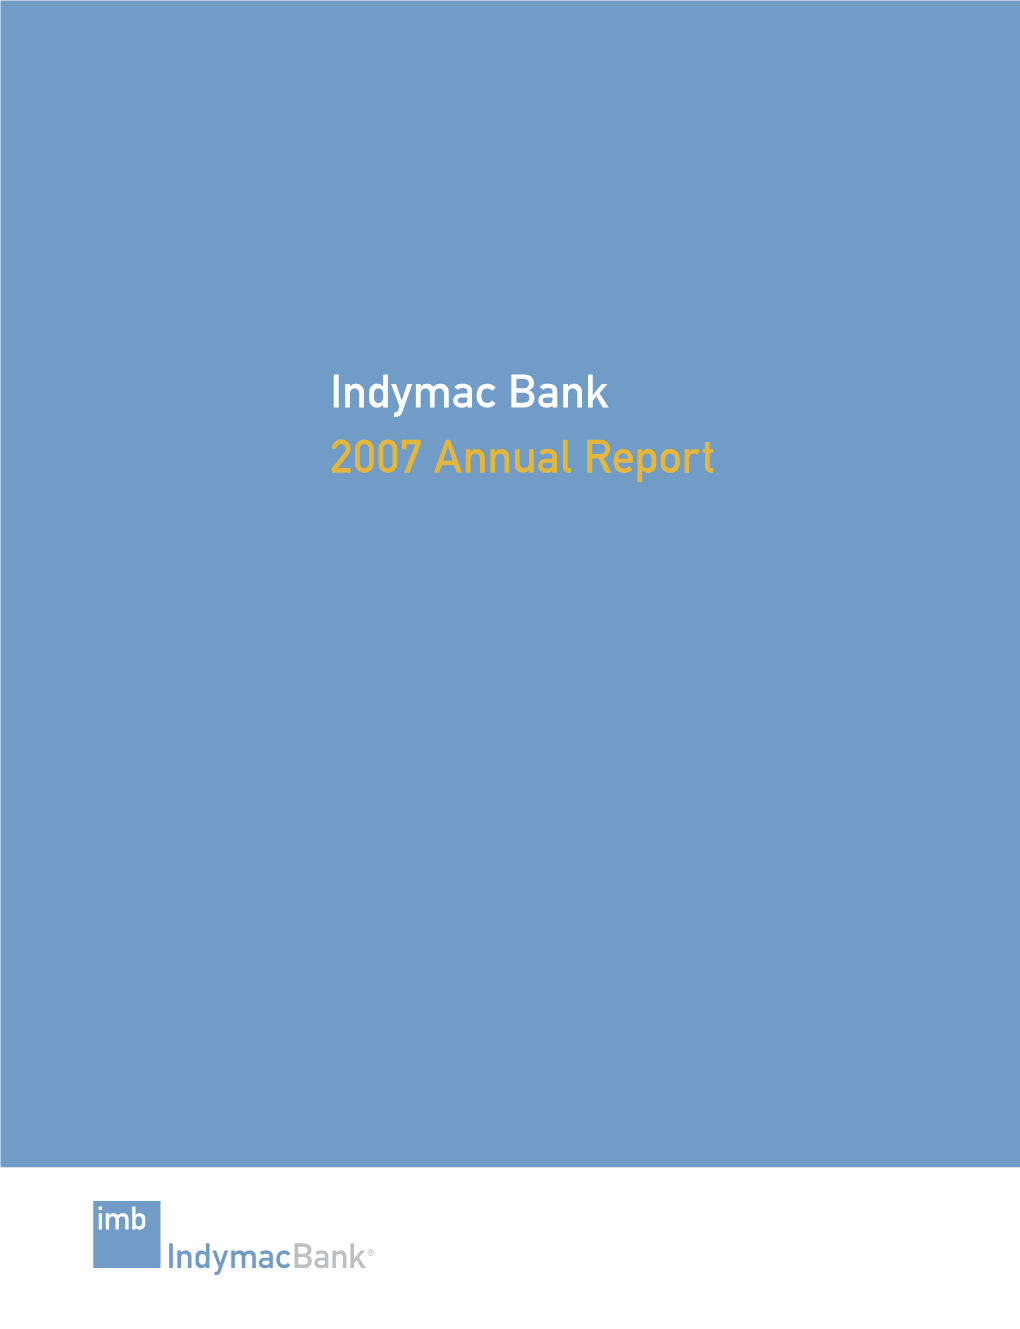 Indymac Bank 2007 Annual Report